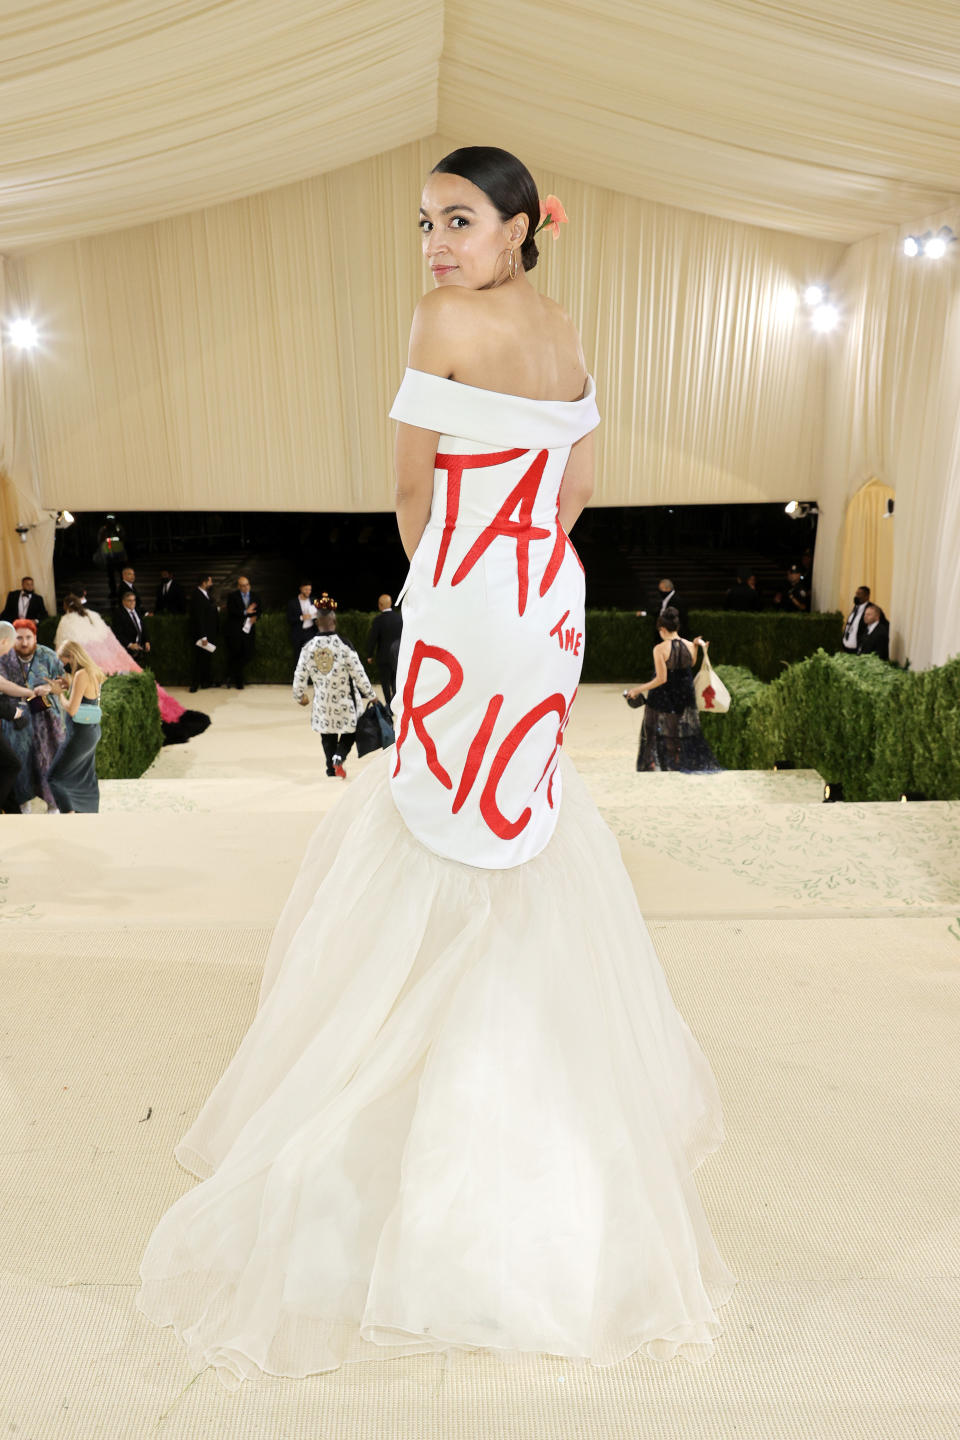   Jamie Mccarthy / Getty Images for The Met Museum/Vogue